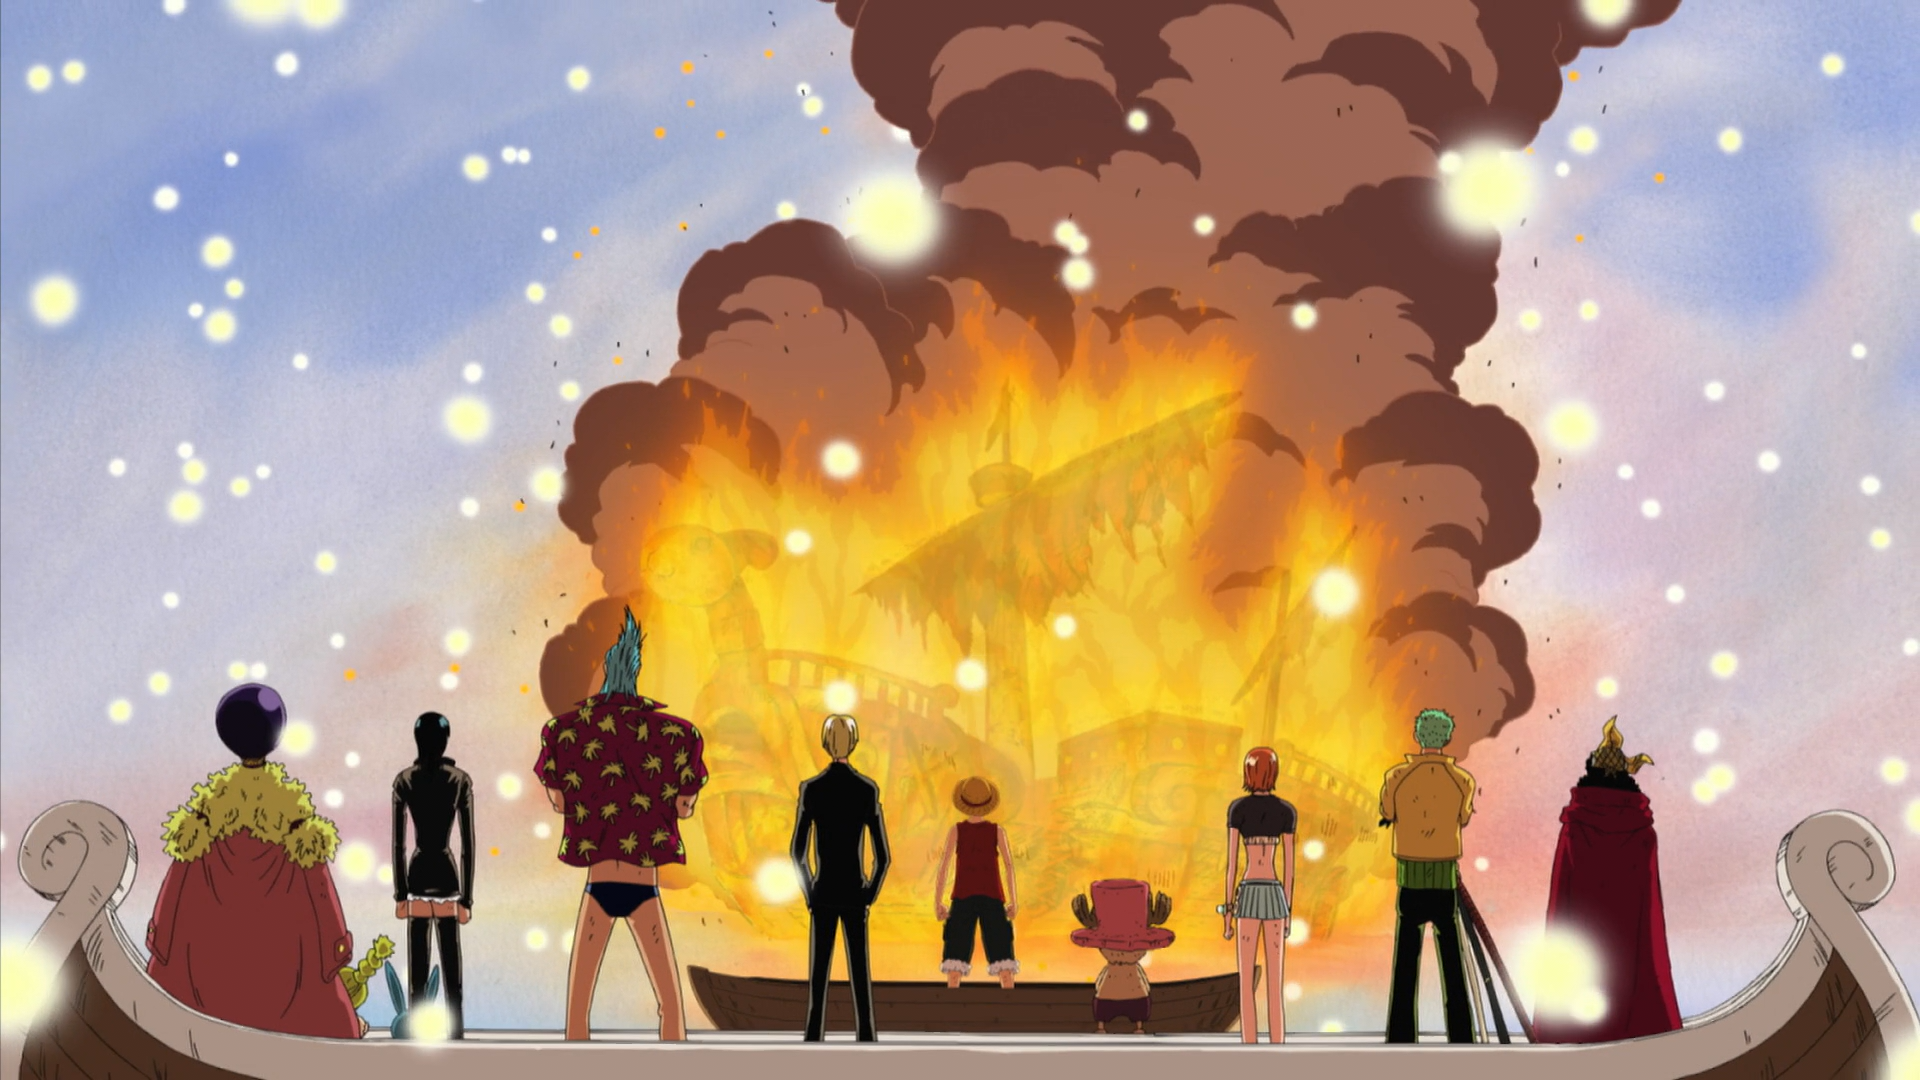 The 15 Saddest 'One Piece' Moments That Legit Made You Cry